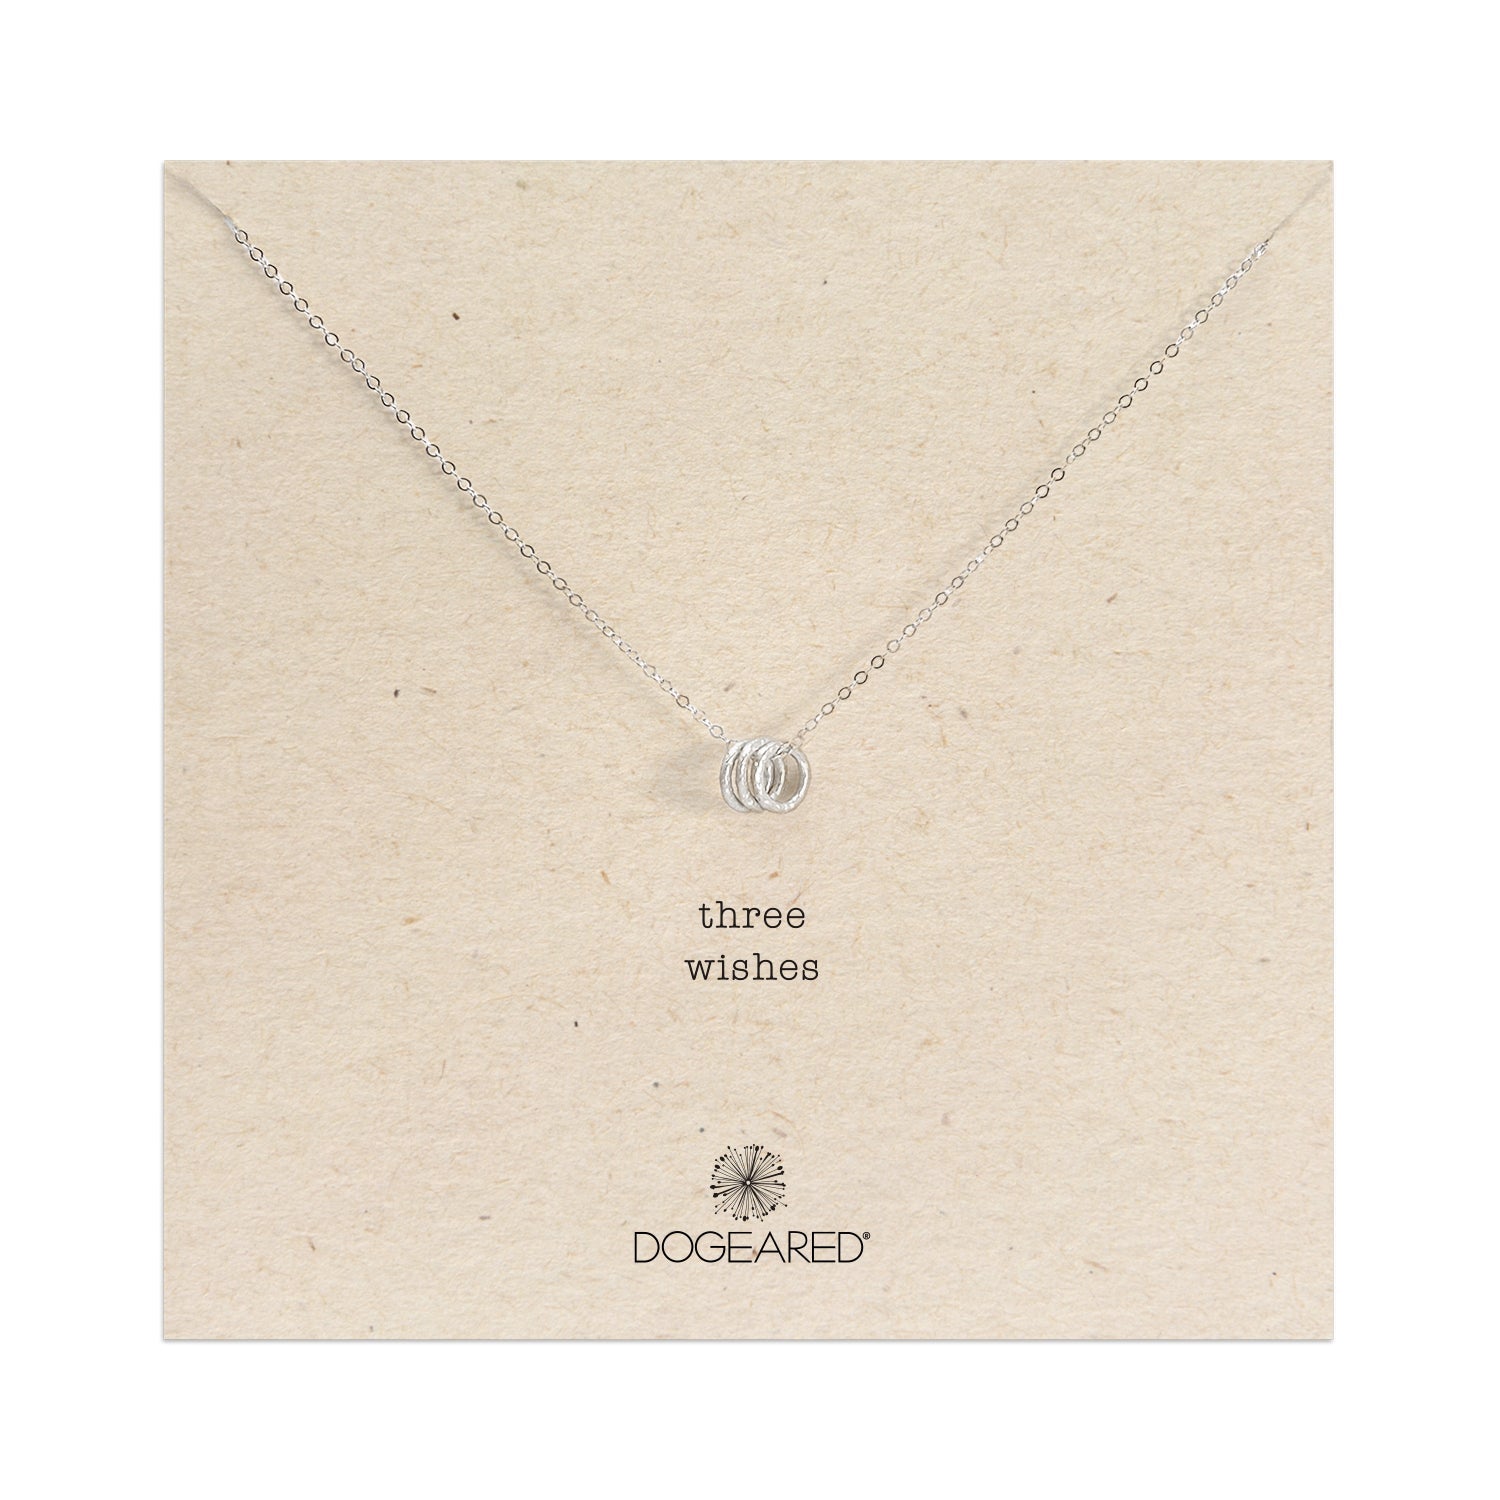 three wishes with three silver rings necklace